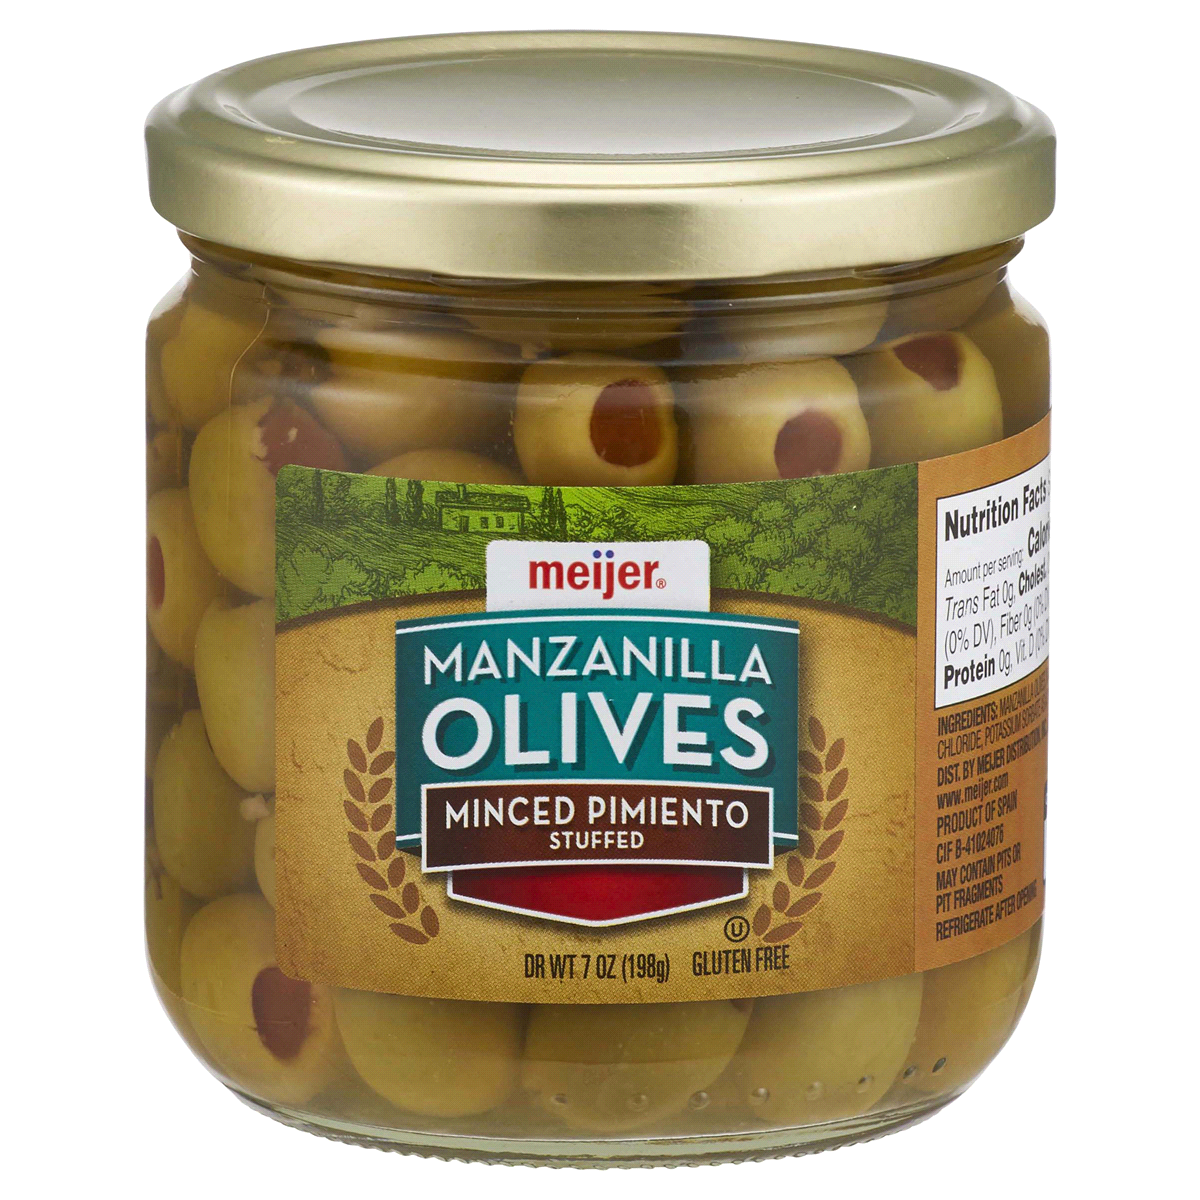 slide 1 of 4, Meijer Manzanilla Olives Stuffed with Minced Pimiento Thrown, 7 oz